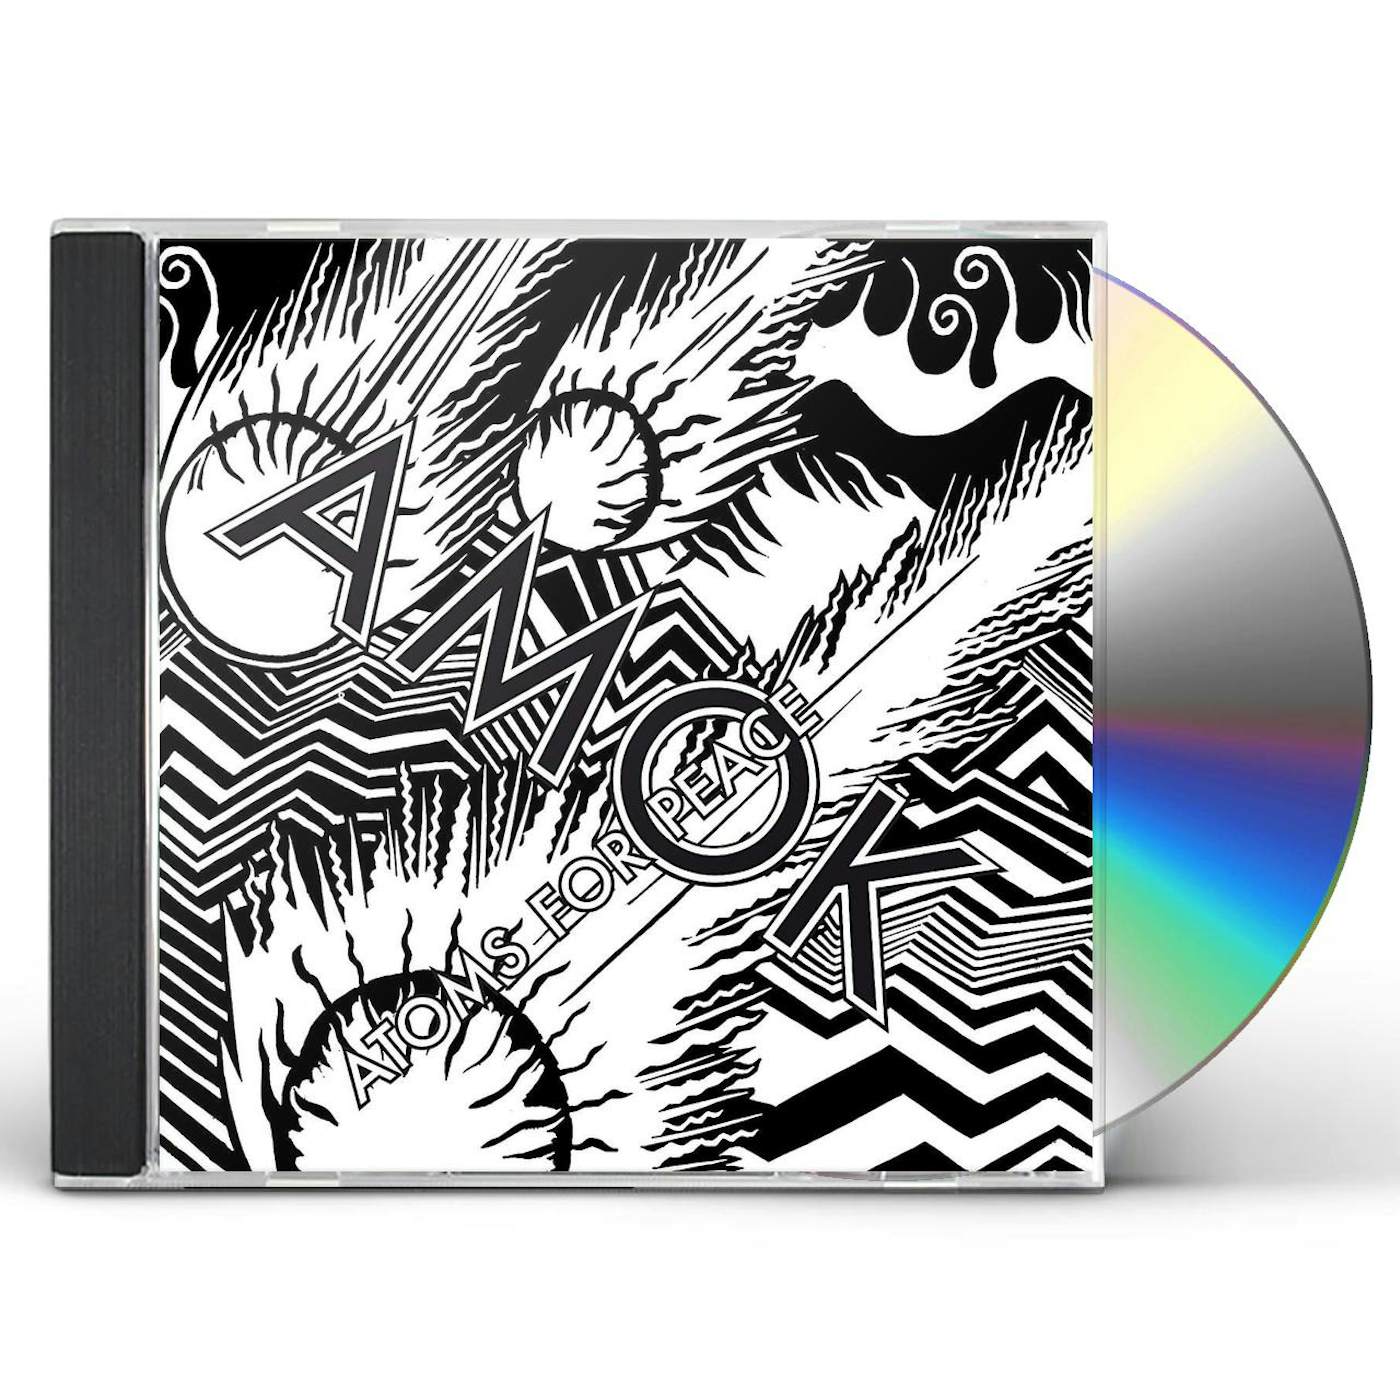 Atoms For Peace AMOK CD